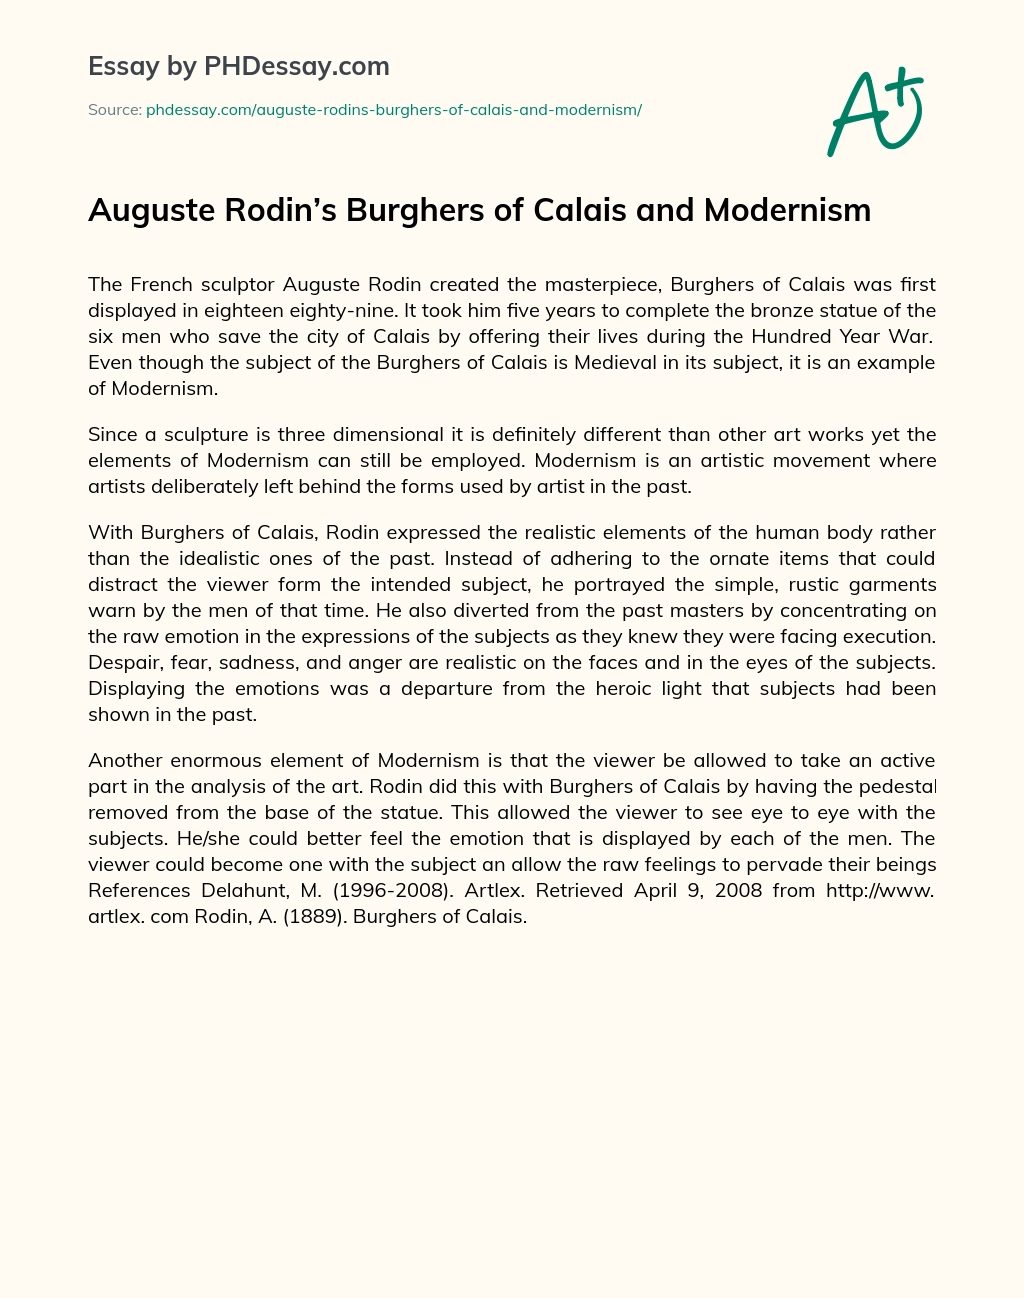 Auguste Rodin’s Burghers of Calais and Modernism essay